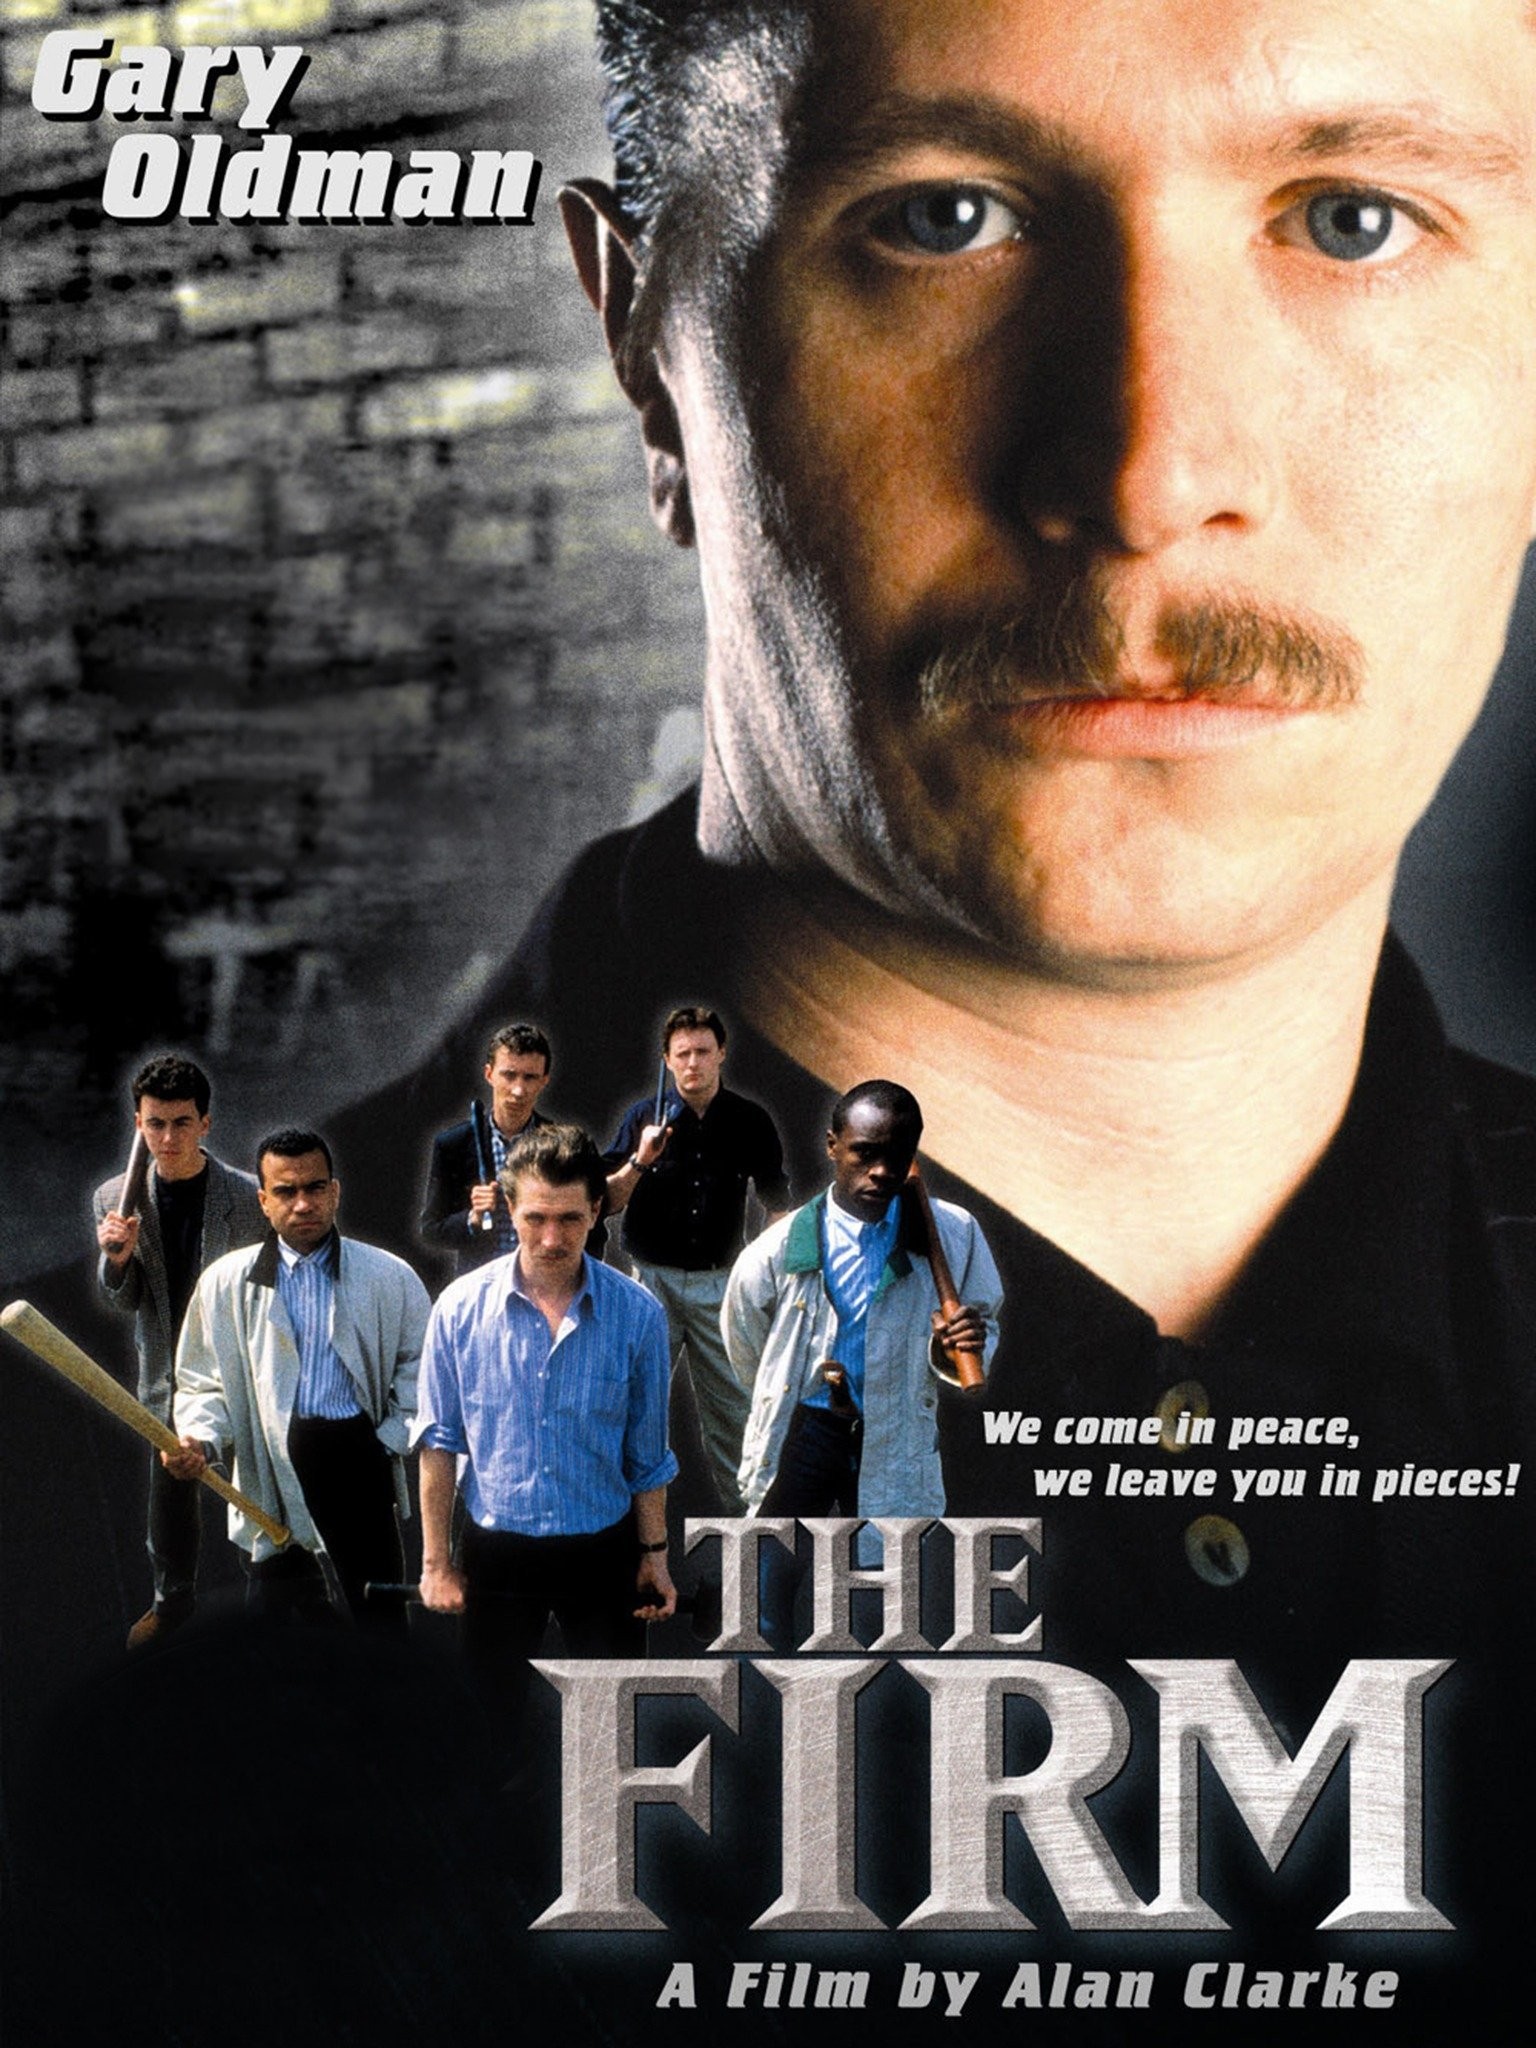 The FIRM